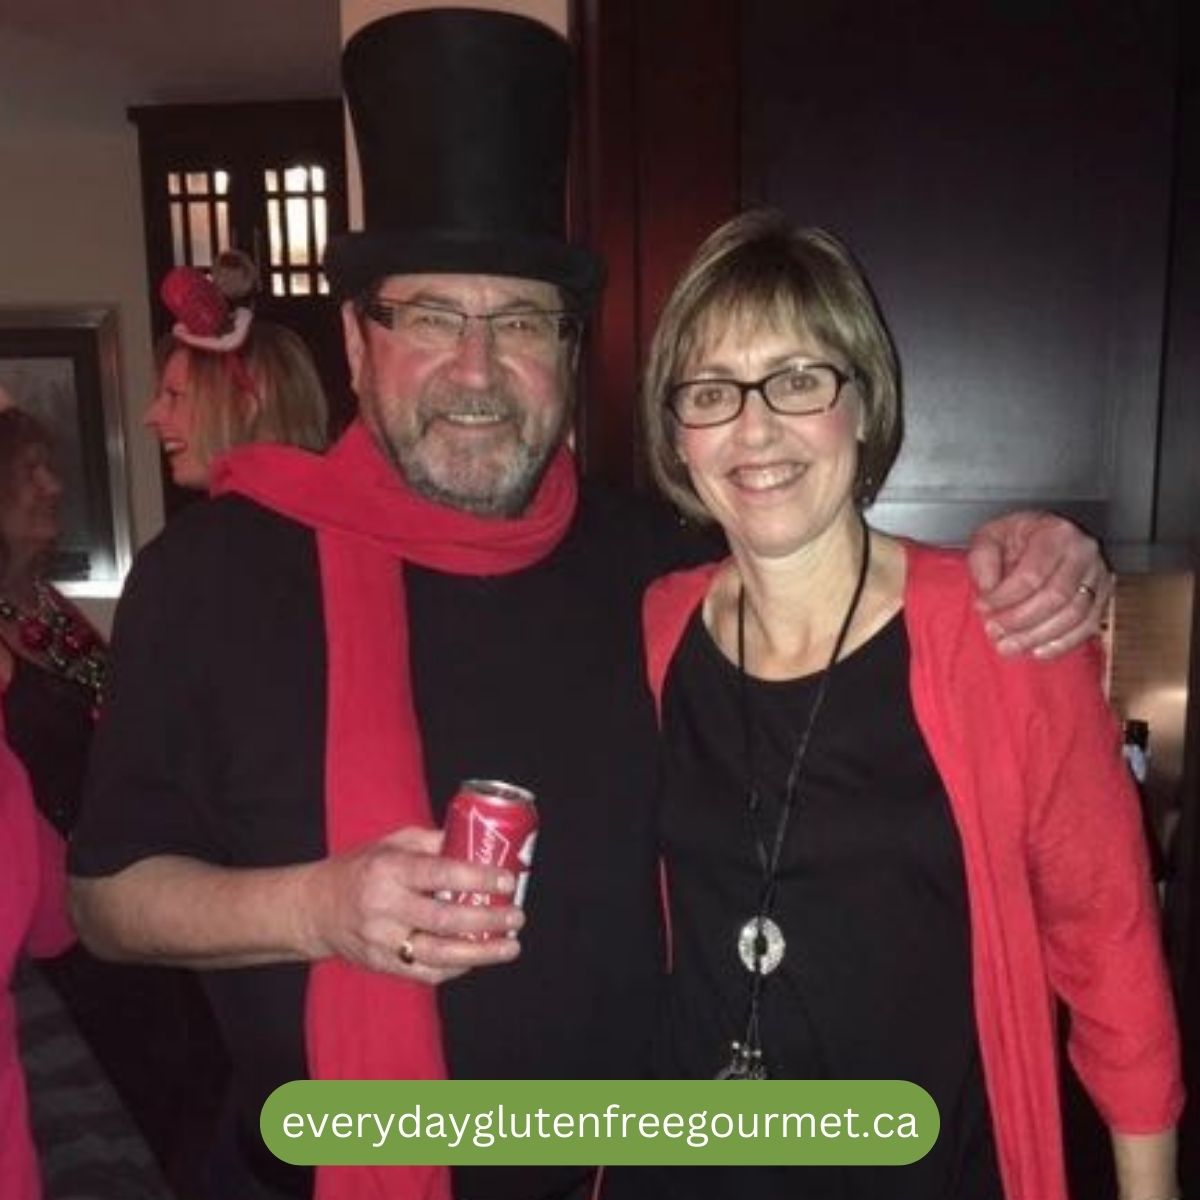 Cinde and Jim dressed in black and red at their Kitchen Party.